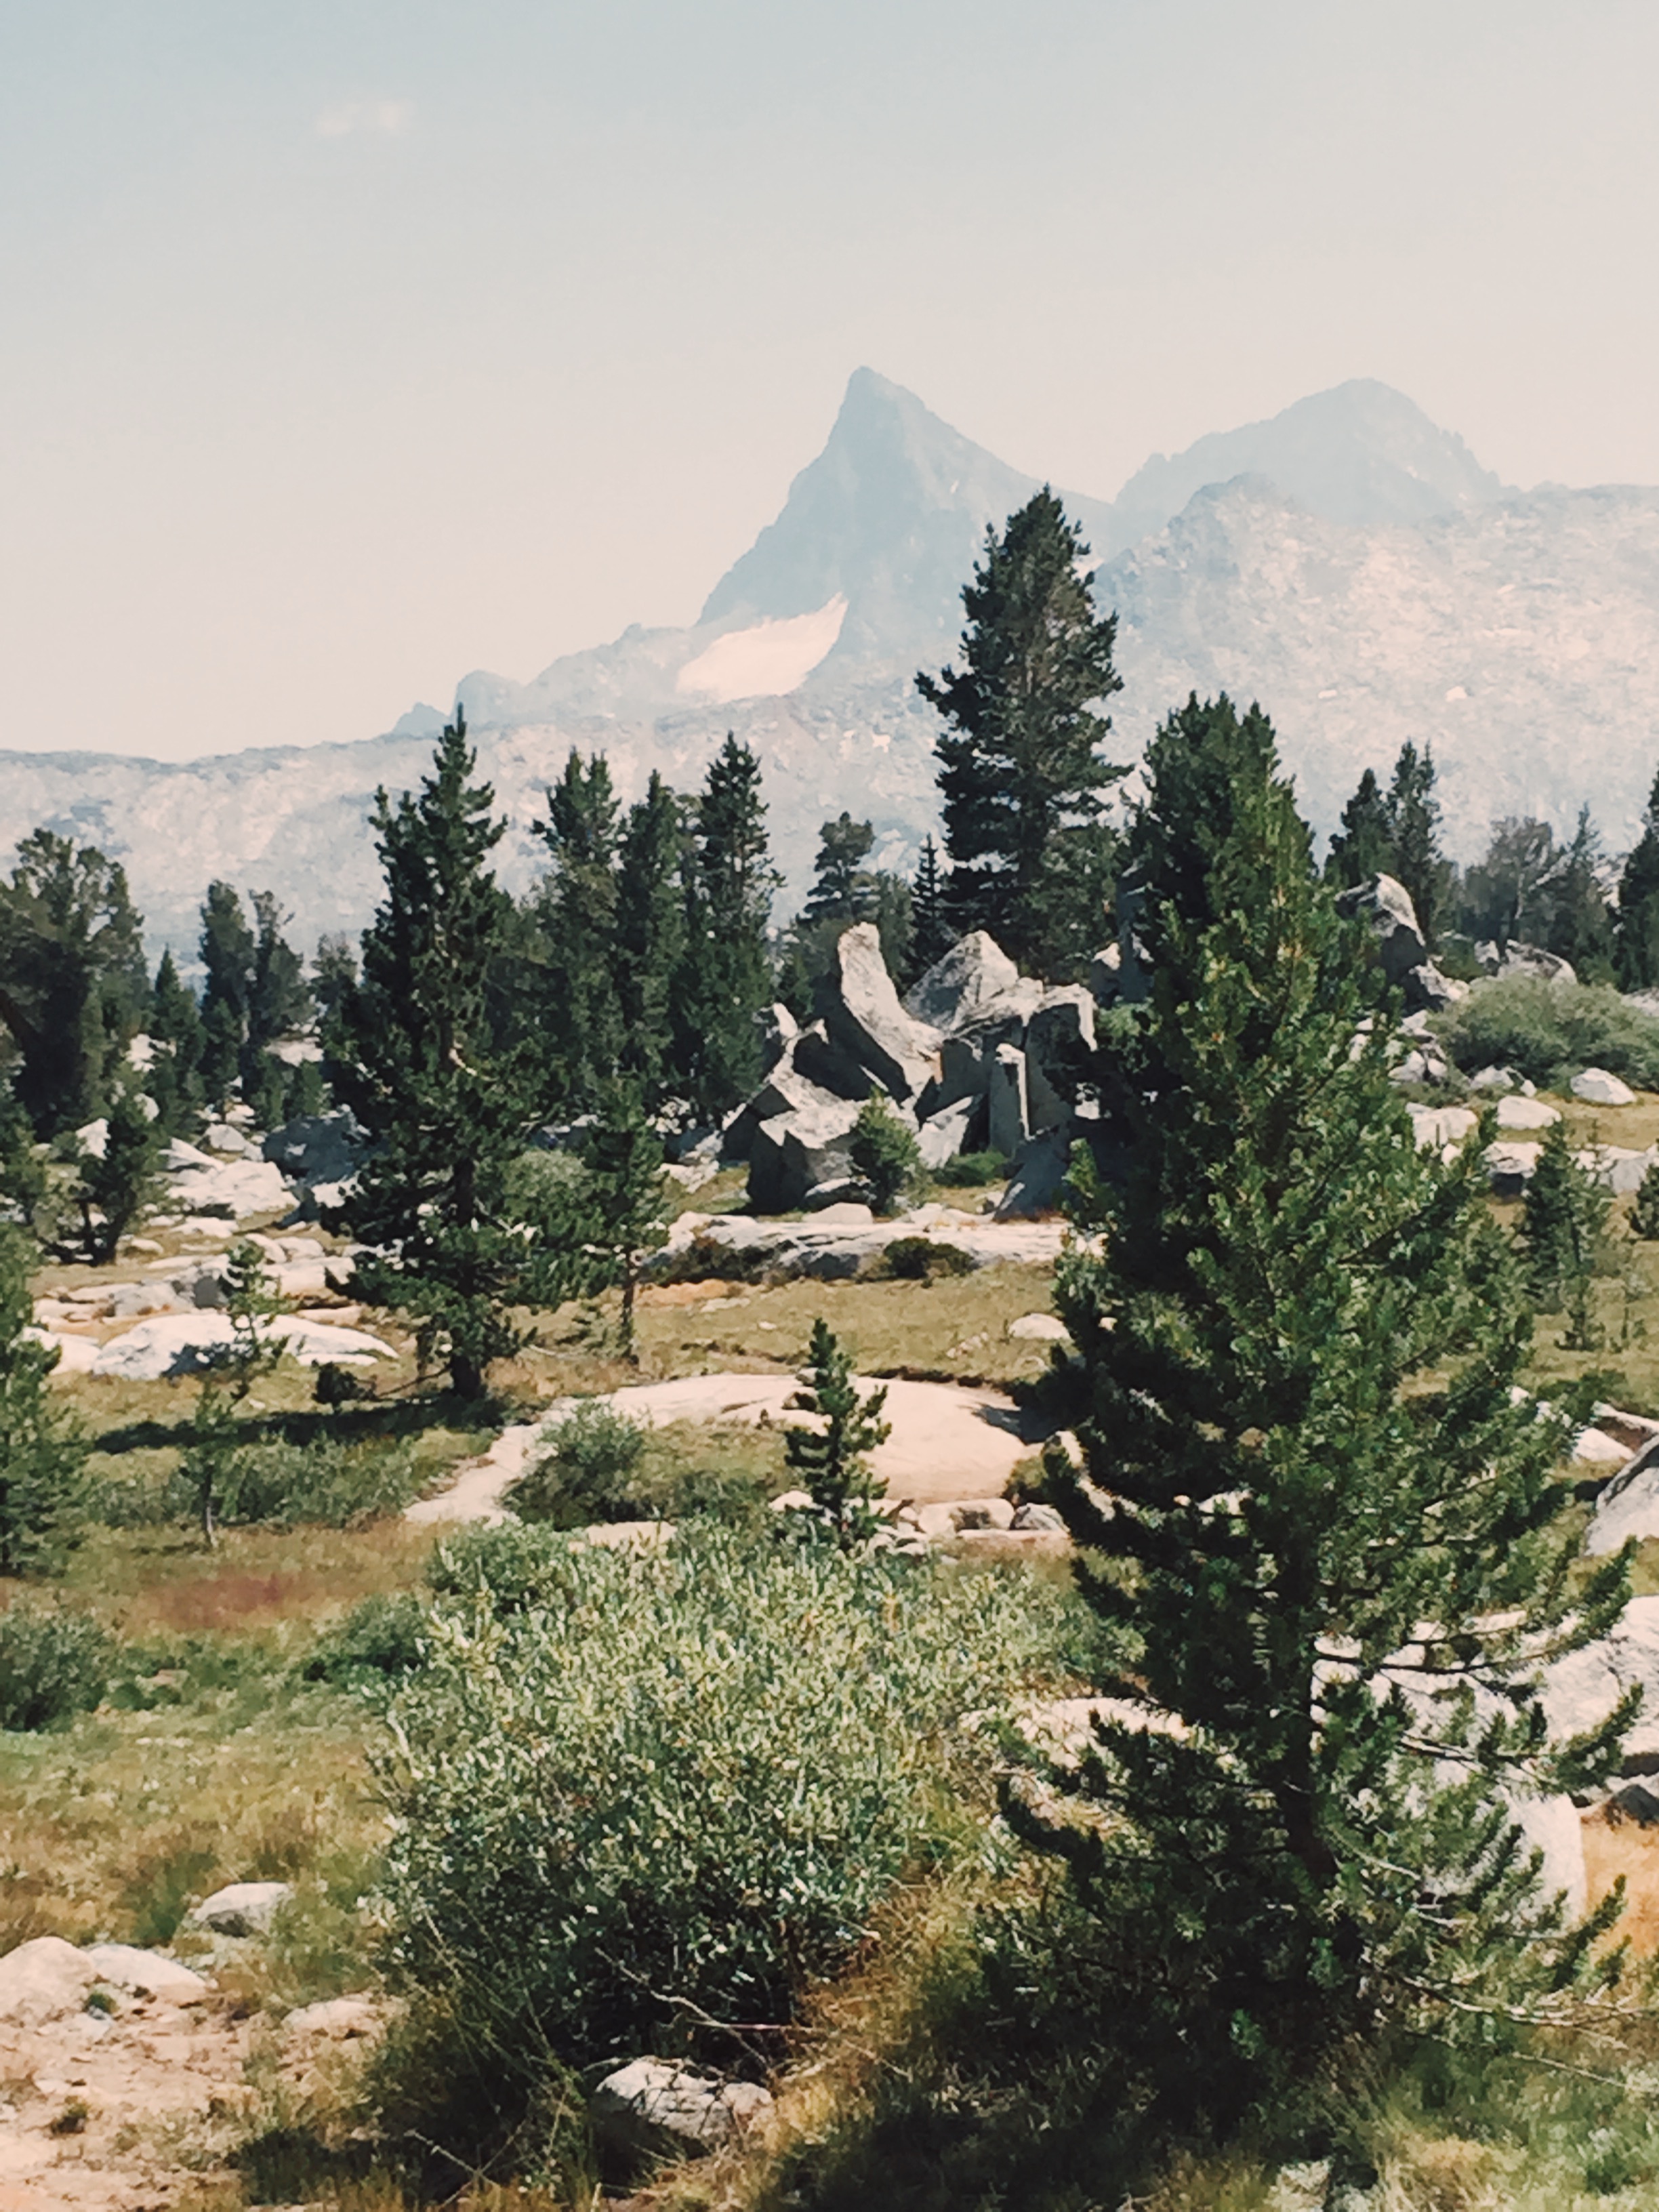  The view toward the Ritter Range shortly after crossing into Ansel Adams Wilderness from Yosemite. 